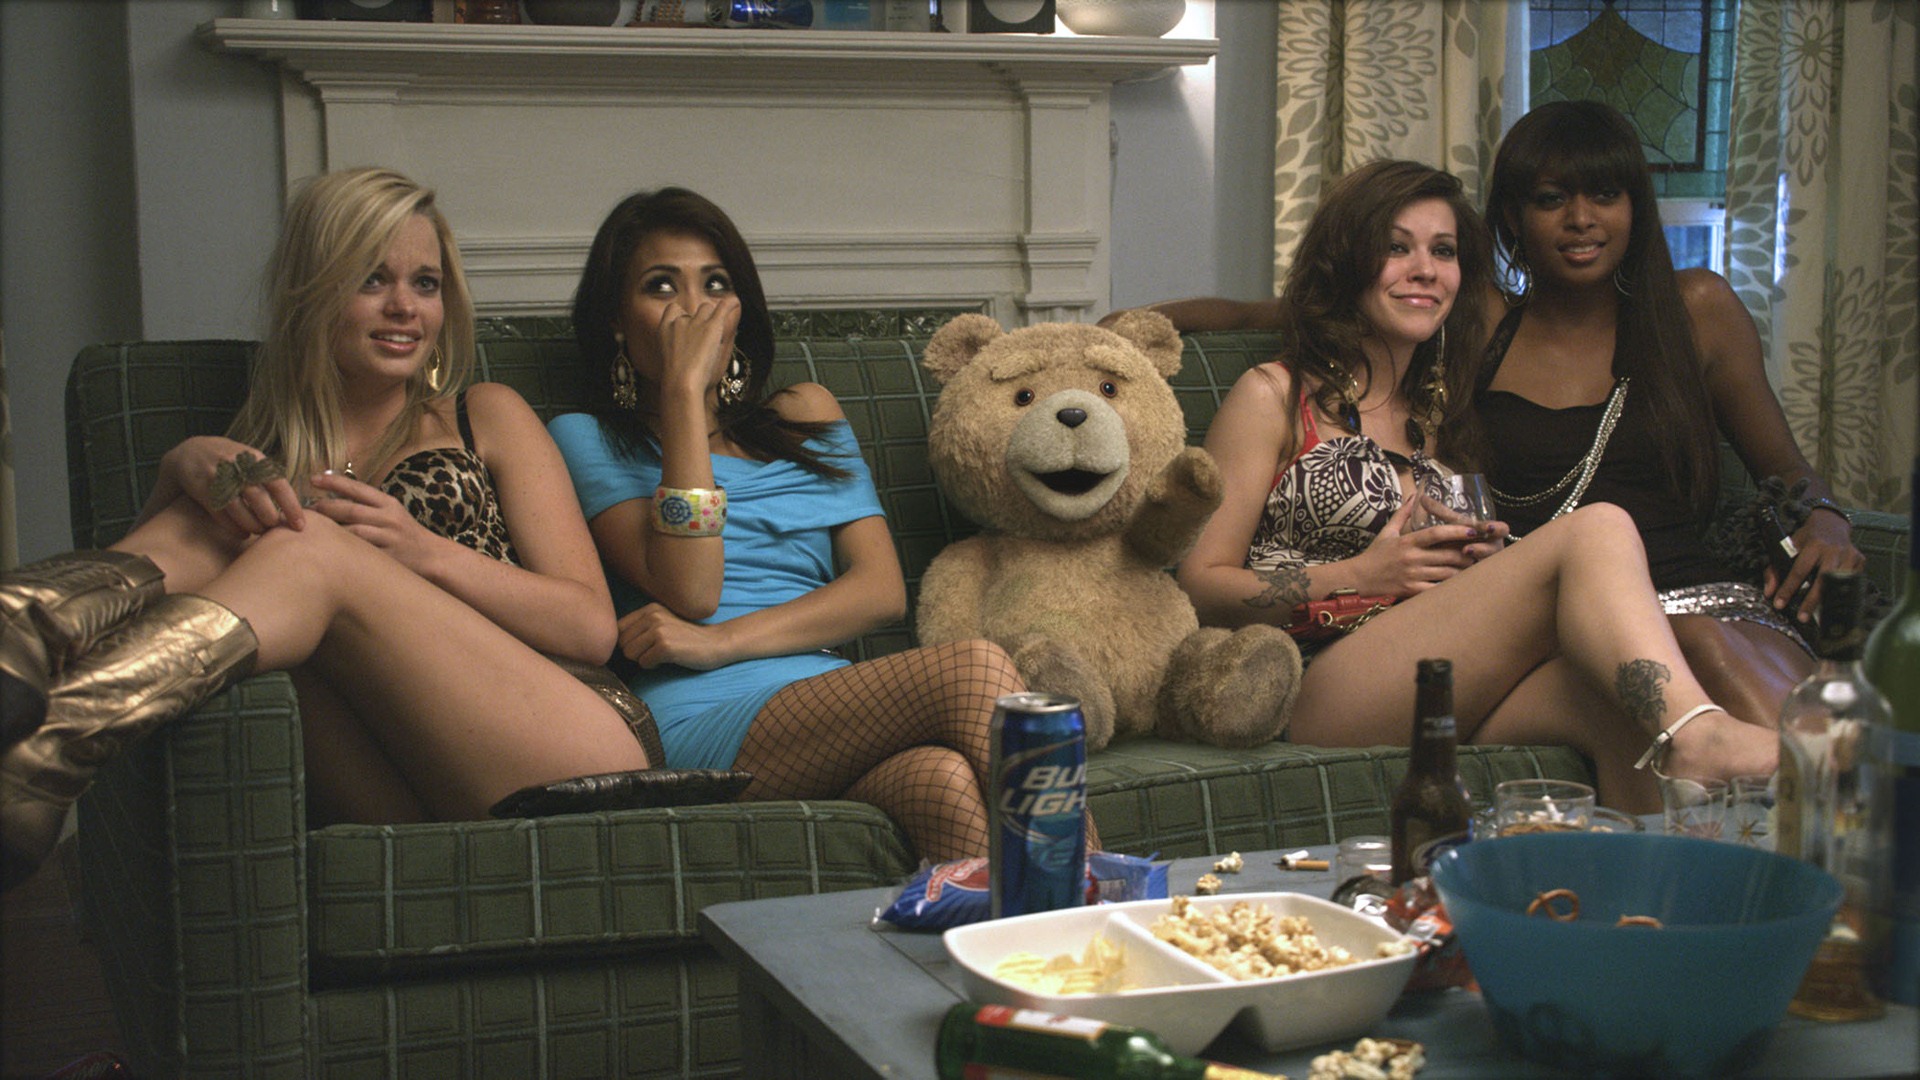 Ted 2012 HD movie wallpapers #6 - 1920x1080